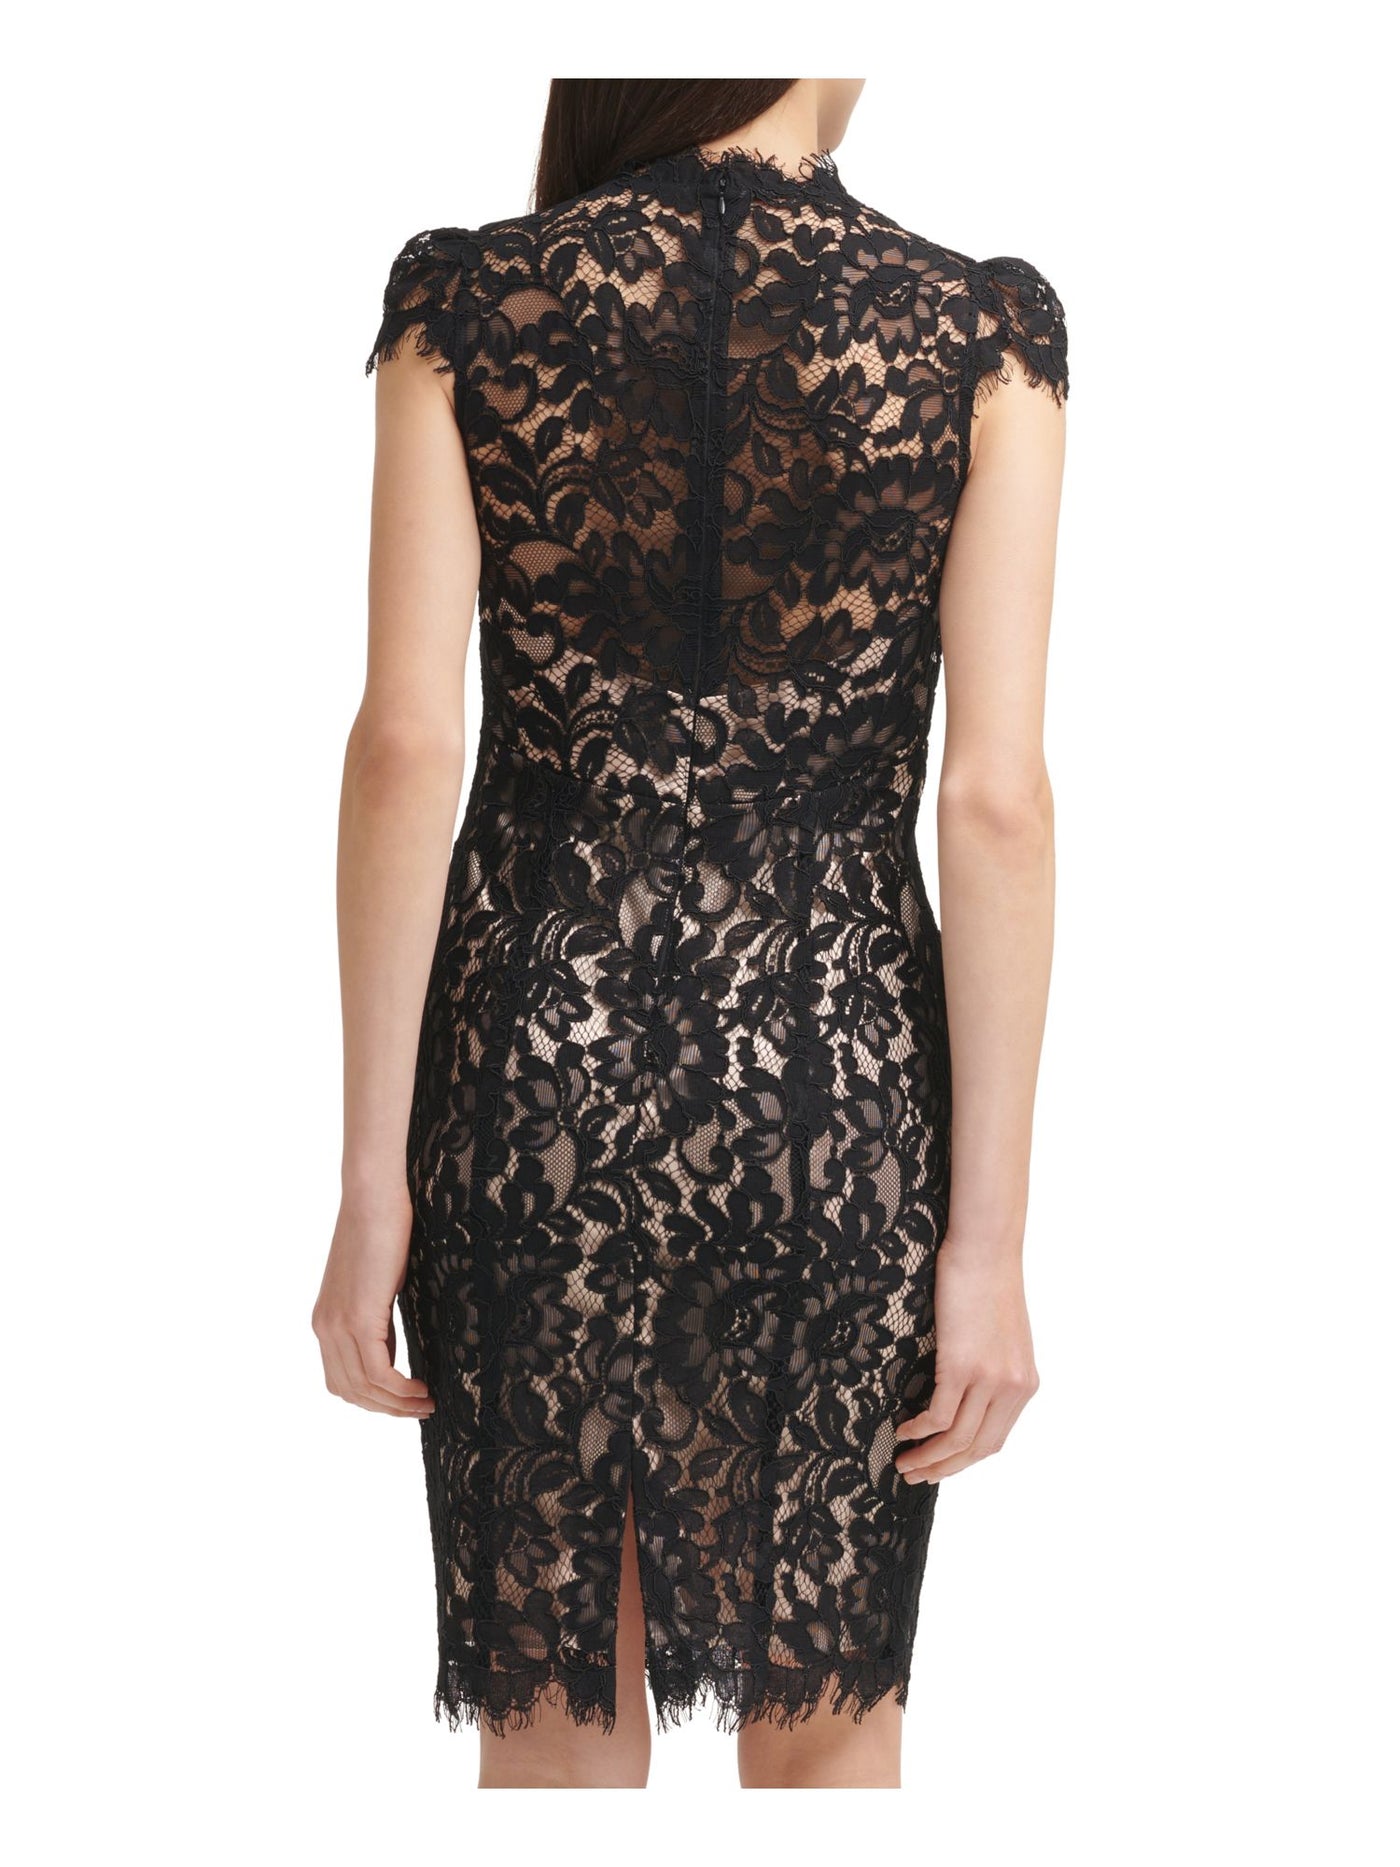 ELIZA J Womens Black Lace Zippered Cap Sleeve V Neck Above The Knee Cocktail Body Con Dress 8